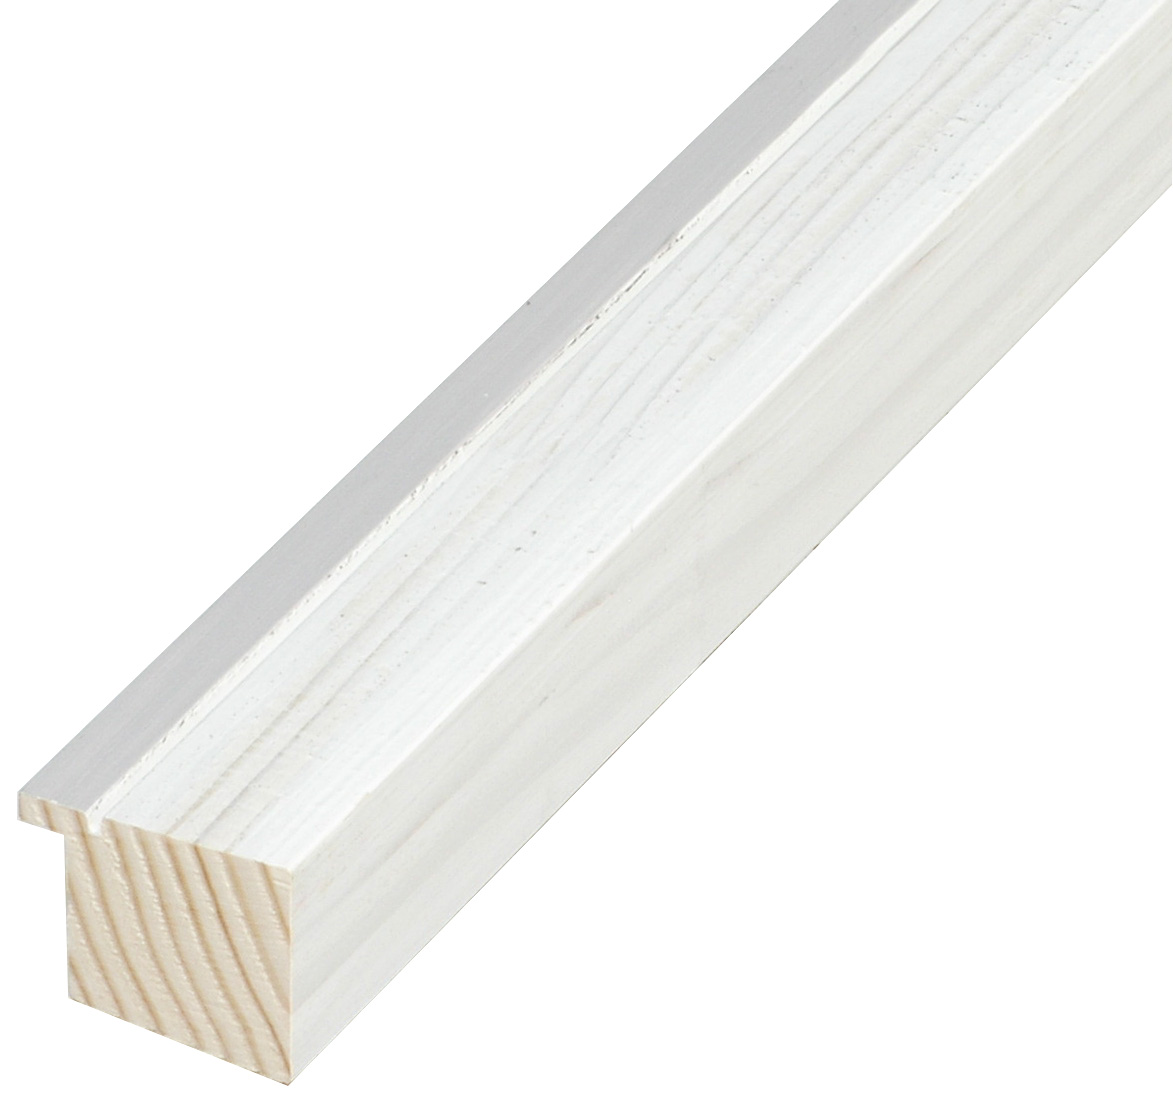 Moulding finger-jointed pine height 33mm - White, pearl egde